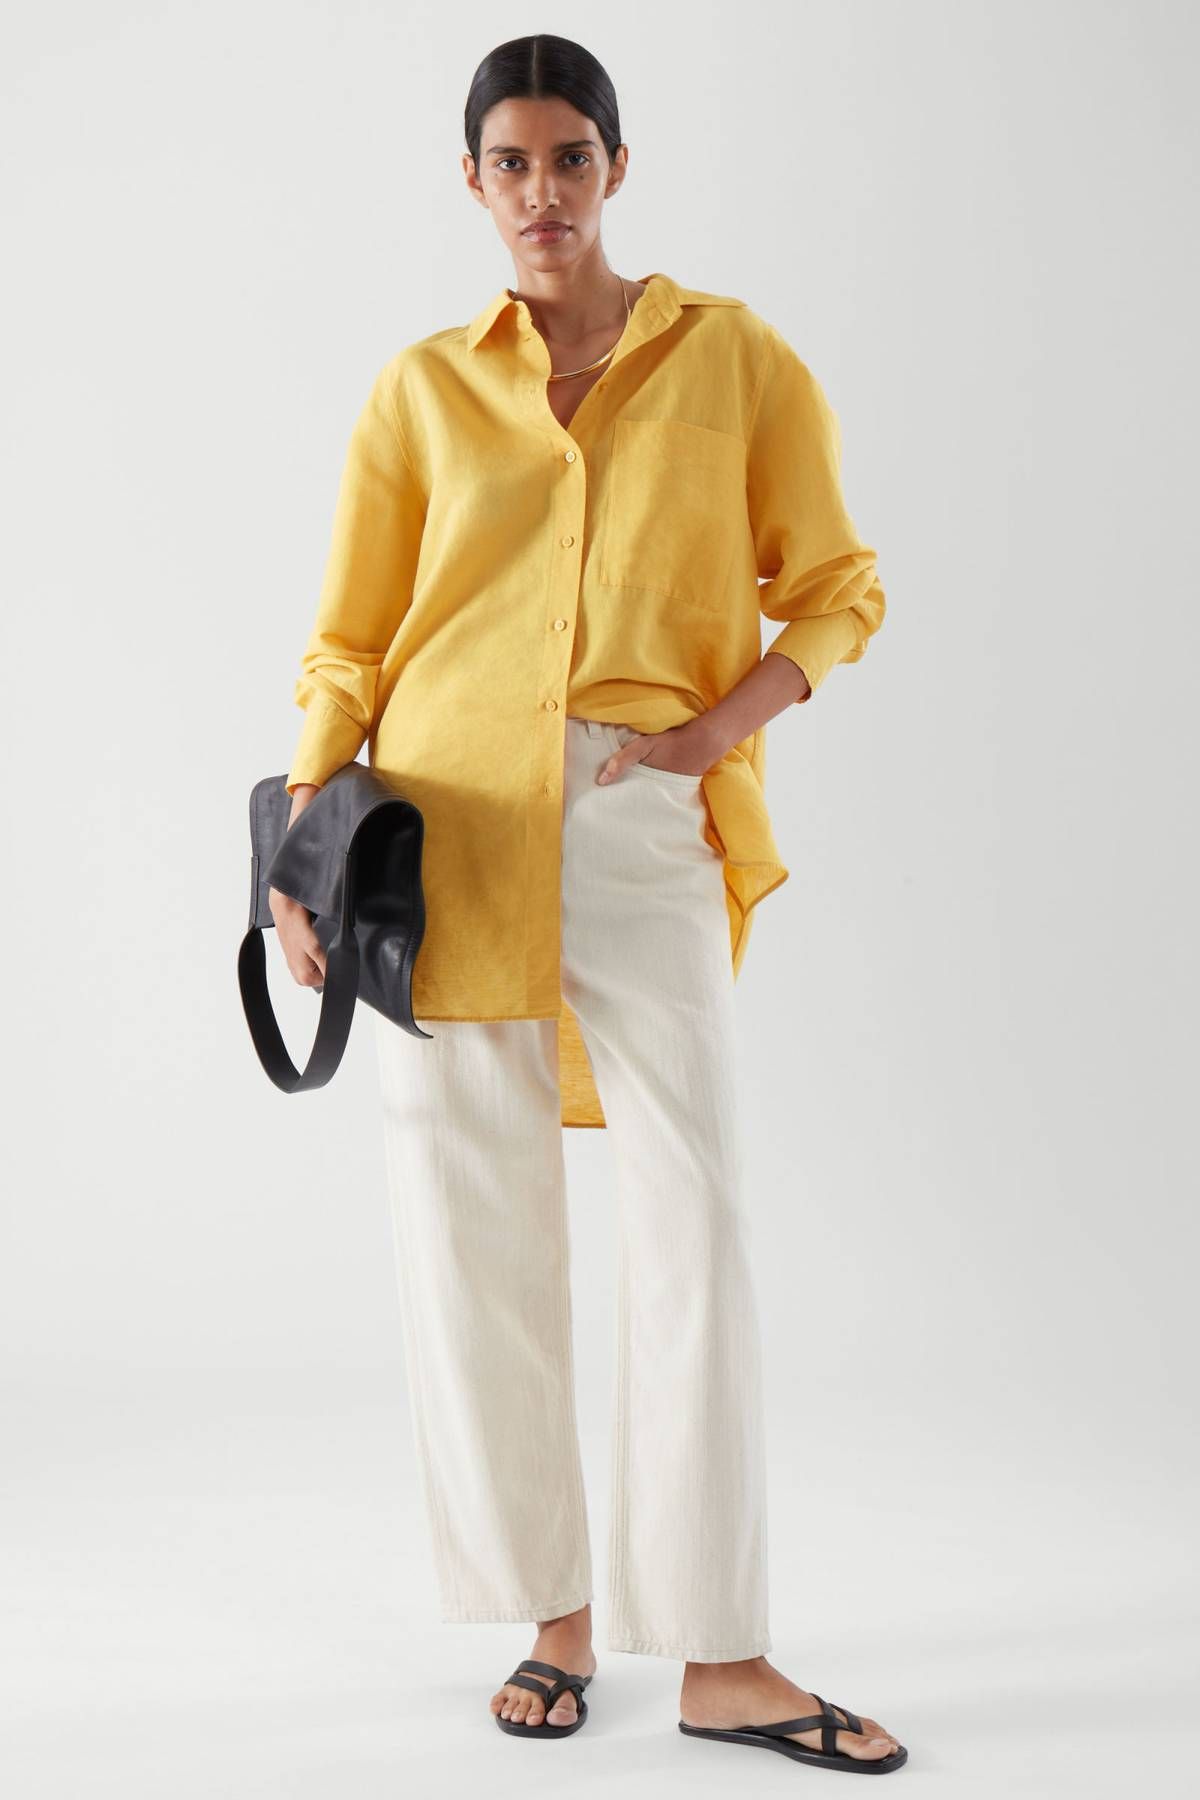 How to Wear Yellow Shirt: 15 Cheerful Outfit Ideas for Women